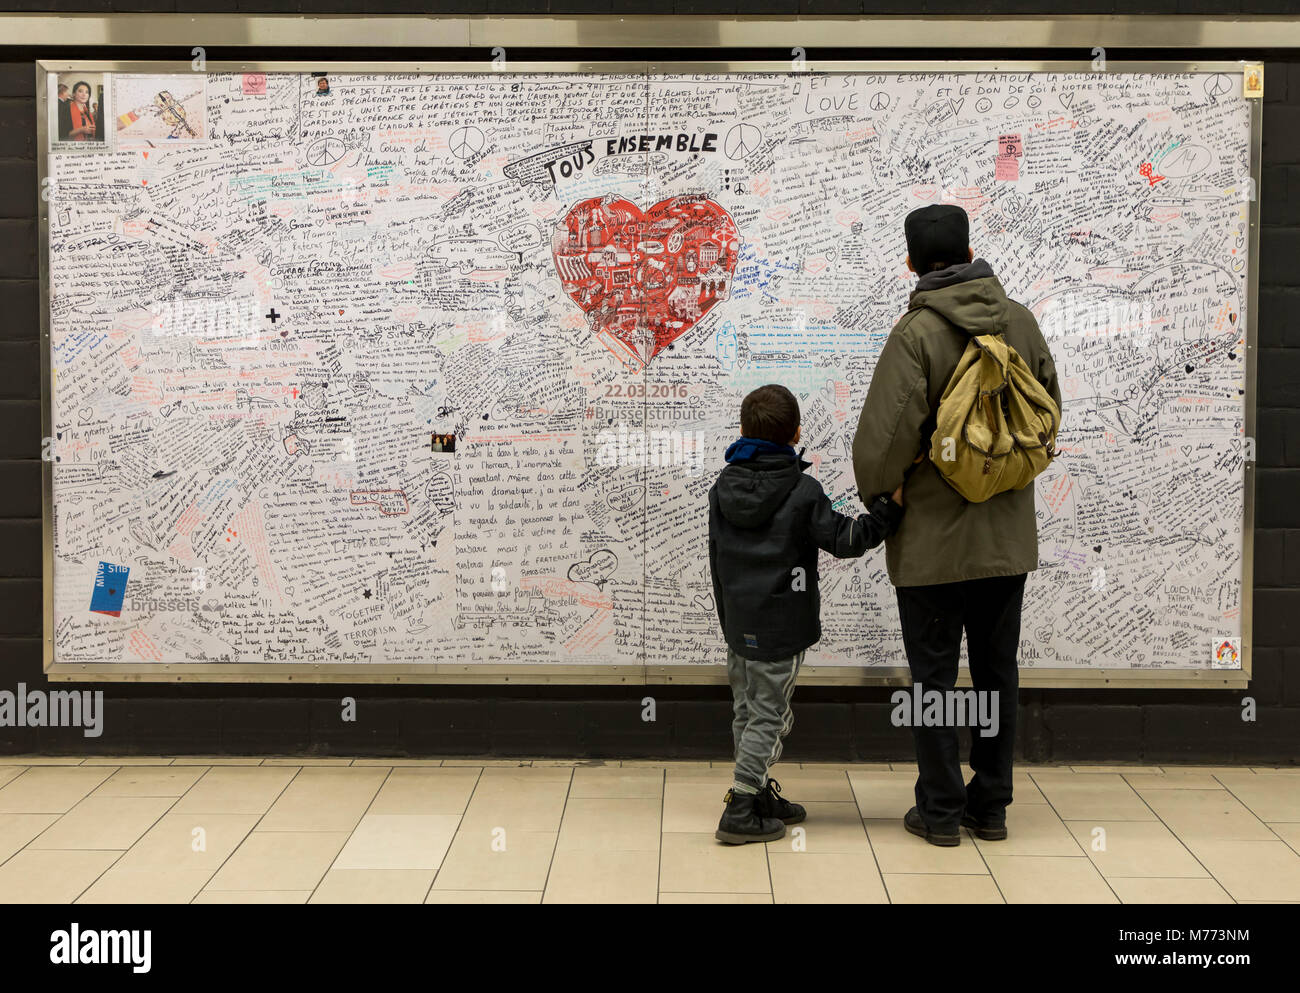 Memorial, commemorative plaque, for victims of terrorism in Maelbeek subway station, Maalbeek, in which 20 people were killed in a bomb attack on 22.0 Stock Photo